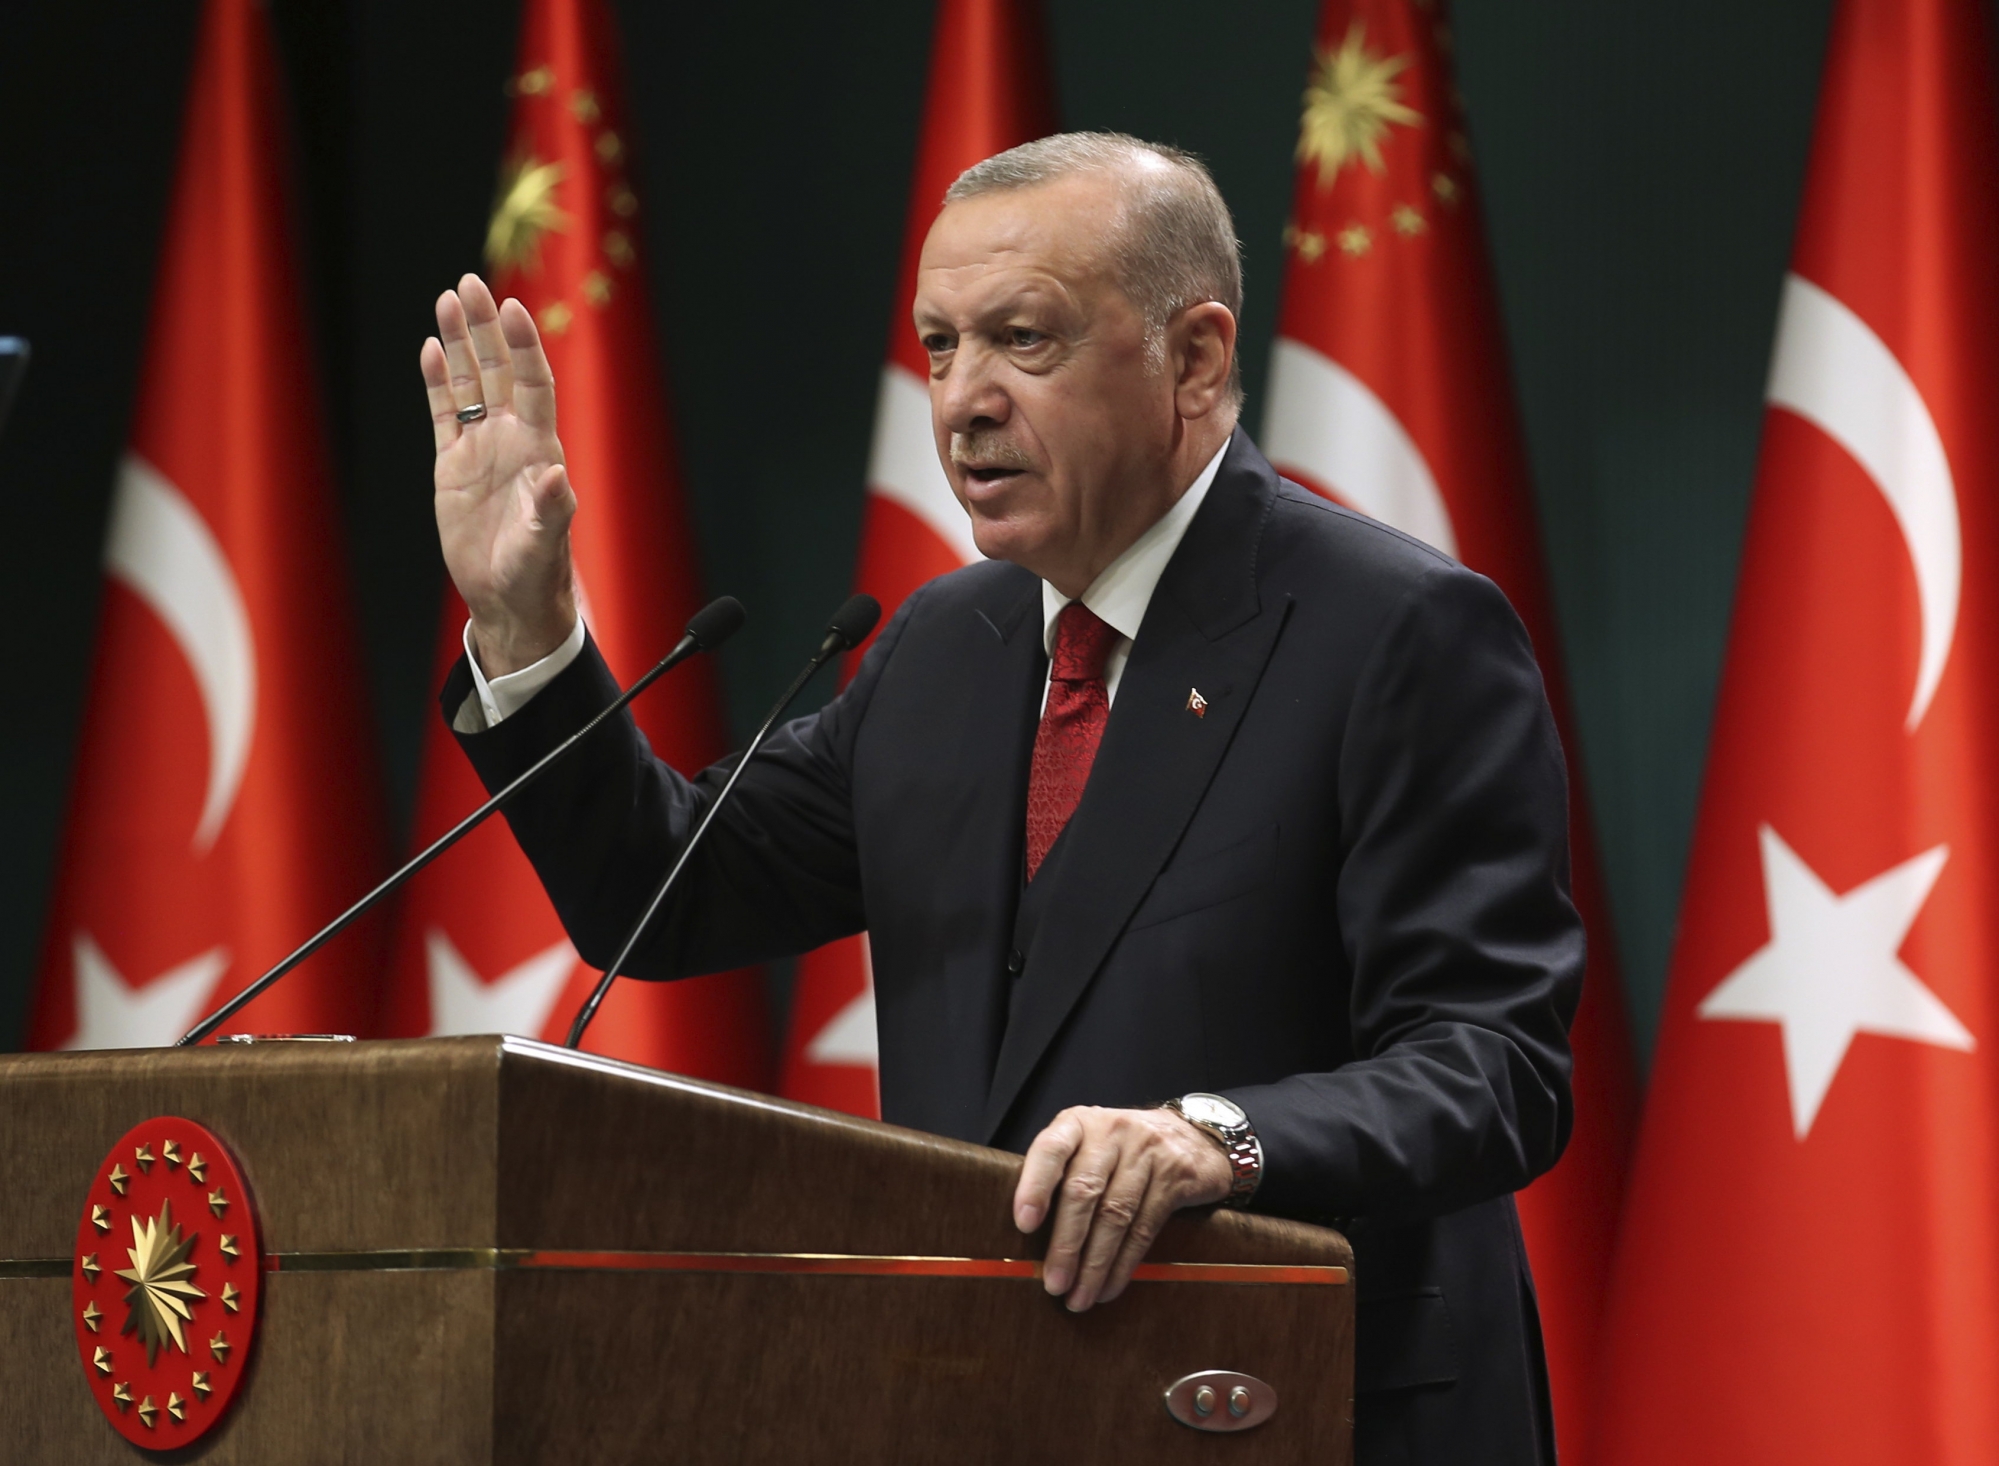 Turkey's President Recep Tayyip Erdogan, talks in a televised address, following a cabinet meeting, in Ankara, Turkey, Monday, Sept. 21, 2020. Erdogan, who has long called for a reform of the United Nations, says the world body has failed in its response to the coronavirus pandemic. Erdogan claimed the UN was late in "accepting the existence" of the pandemic and had failed to "make its presence felt" for nations requiring help to fight infections. (Turkish Presidency via AP, Pool) ArcInfo